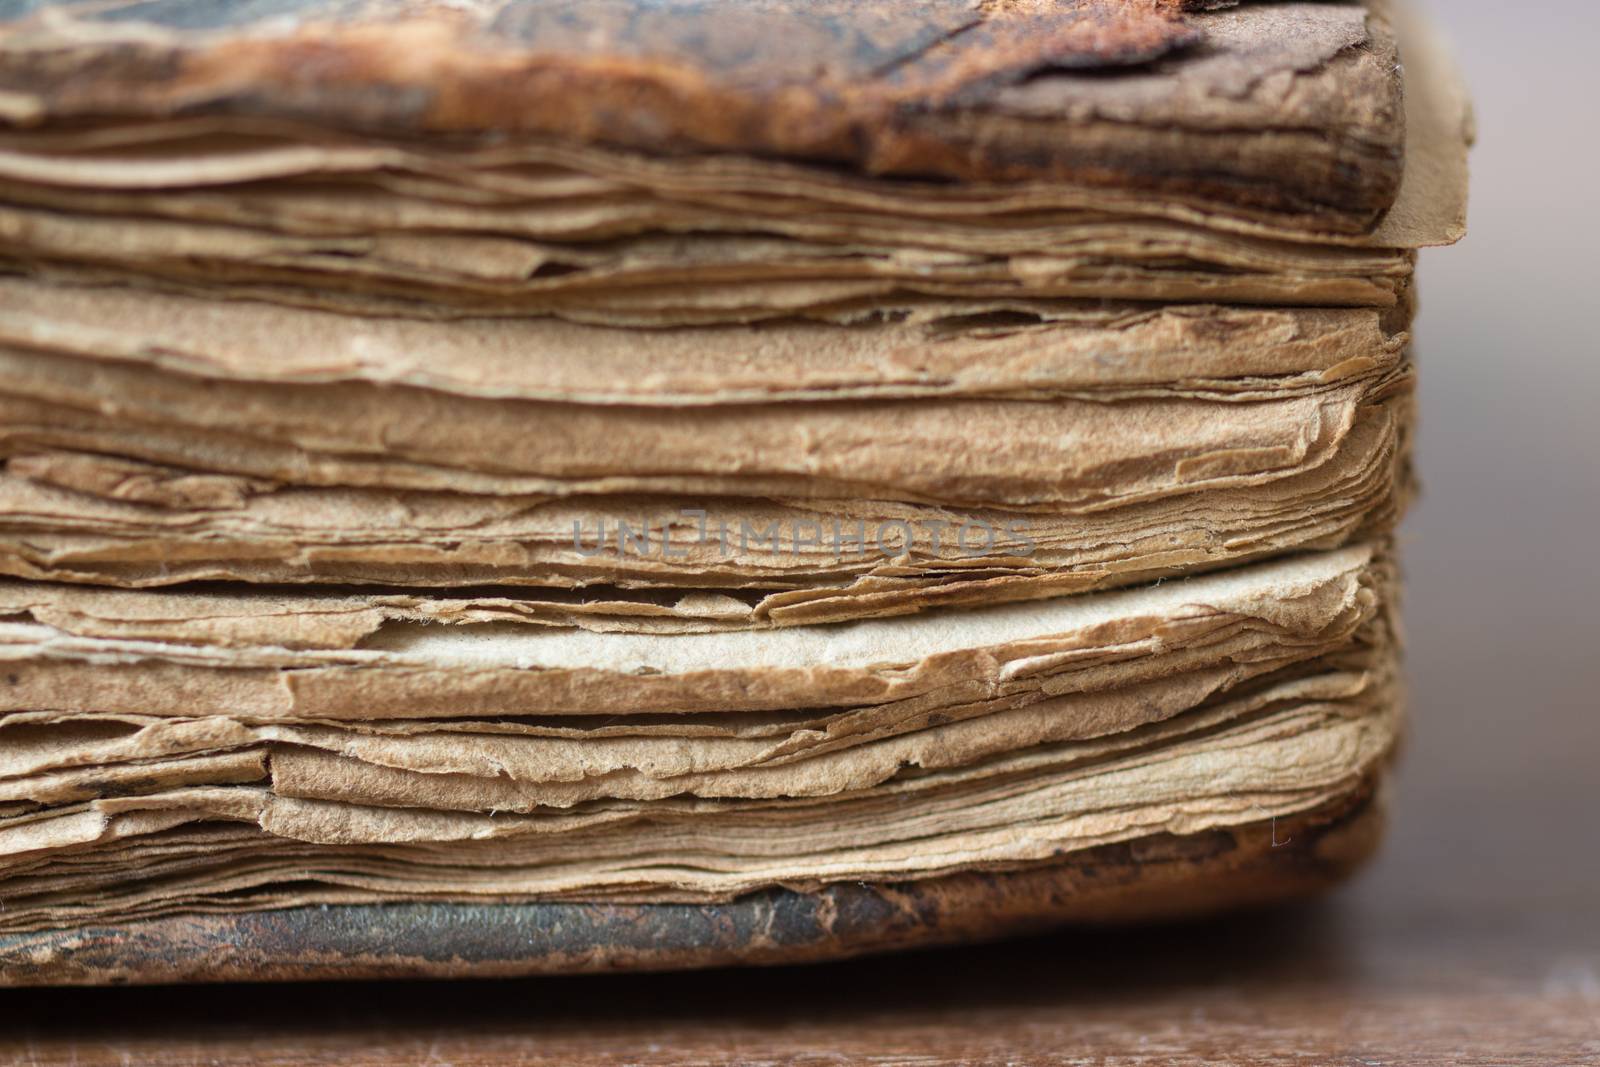 Closeup of an old vintage book with destressed wrinkled pages